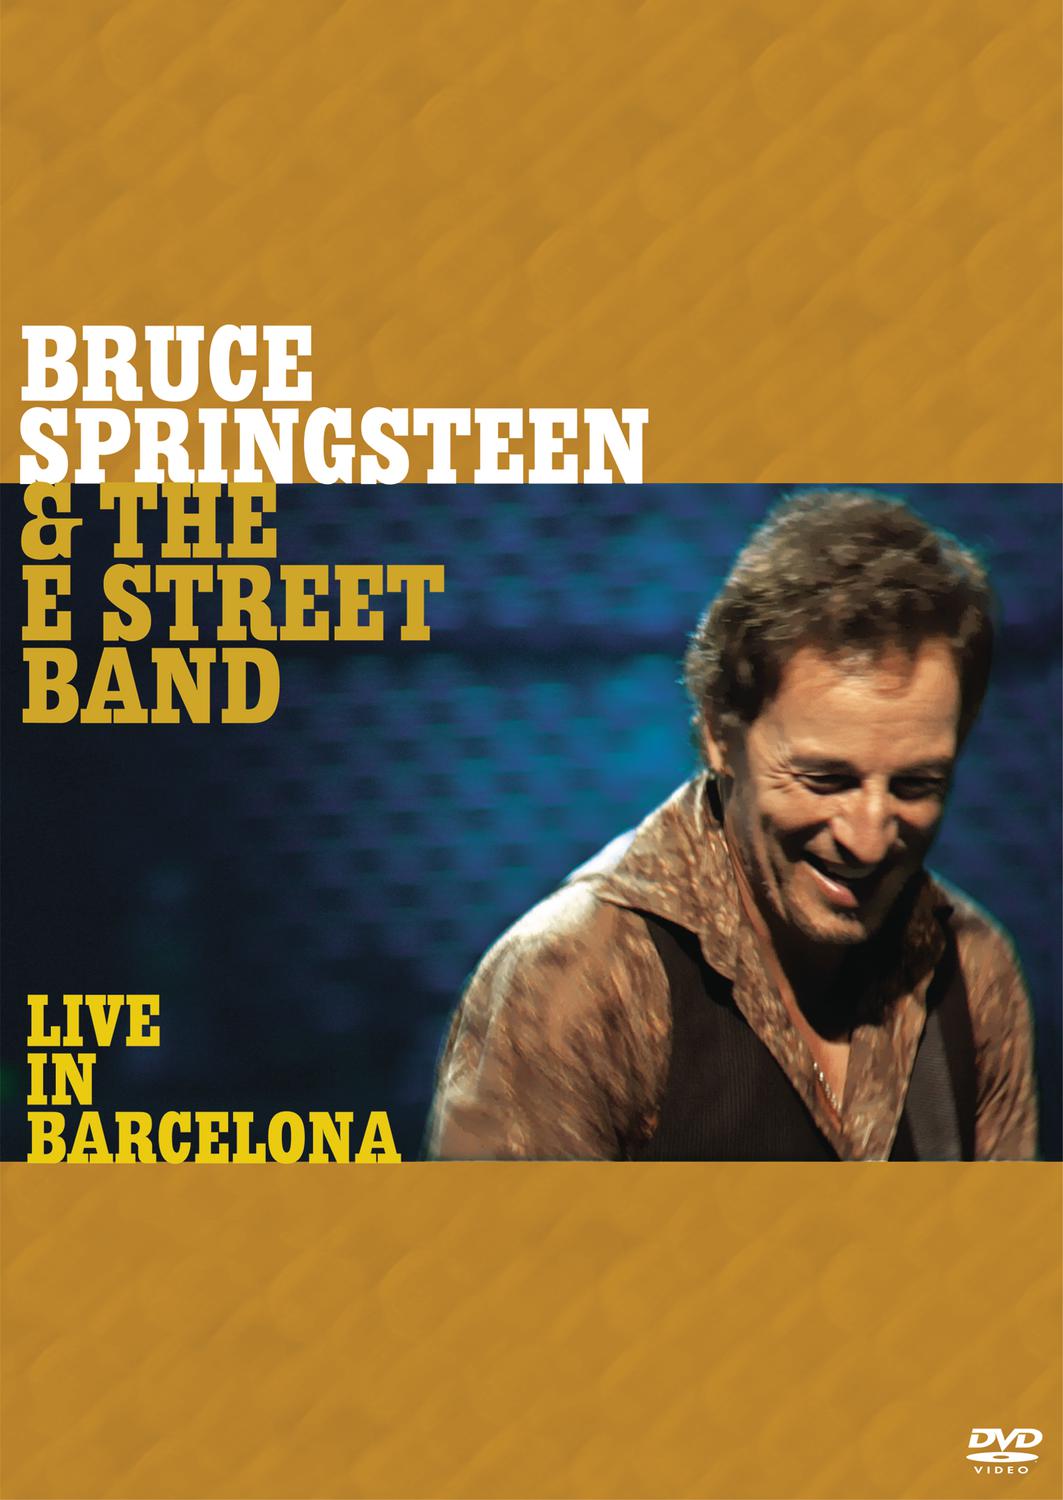 Bruce Springsteen Live in Barcelona front cover